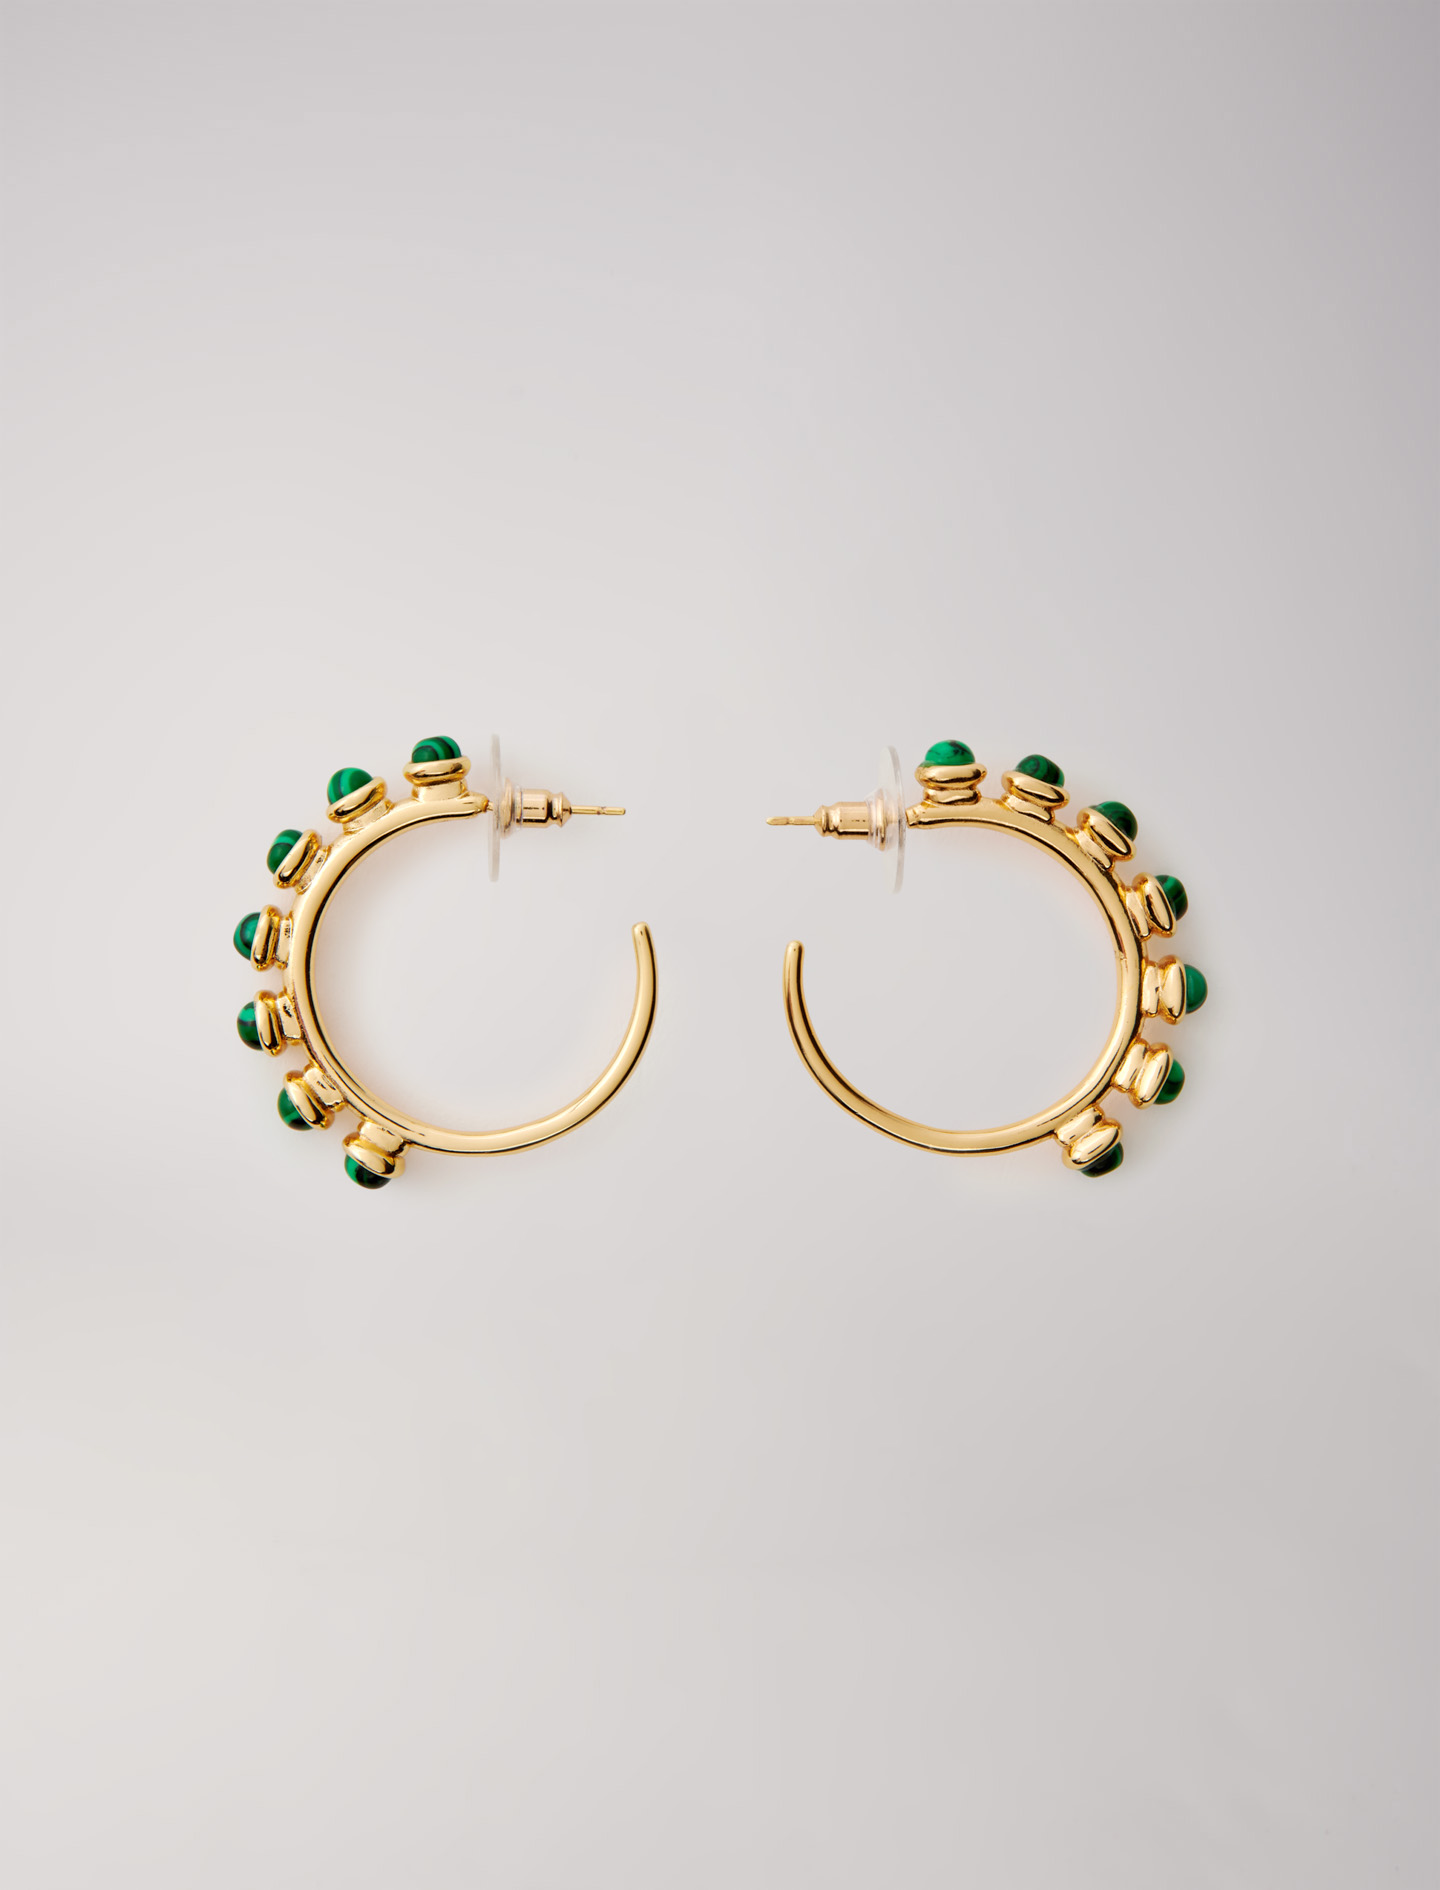 Mixte's malachite Jewellery: Rhinestone earrings for Fall/Winter, size Mixte-All Accessories-OS (ONE SIZE), in color Gold / Yellow